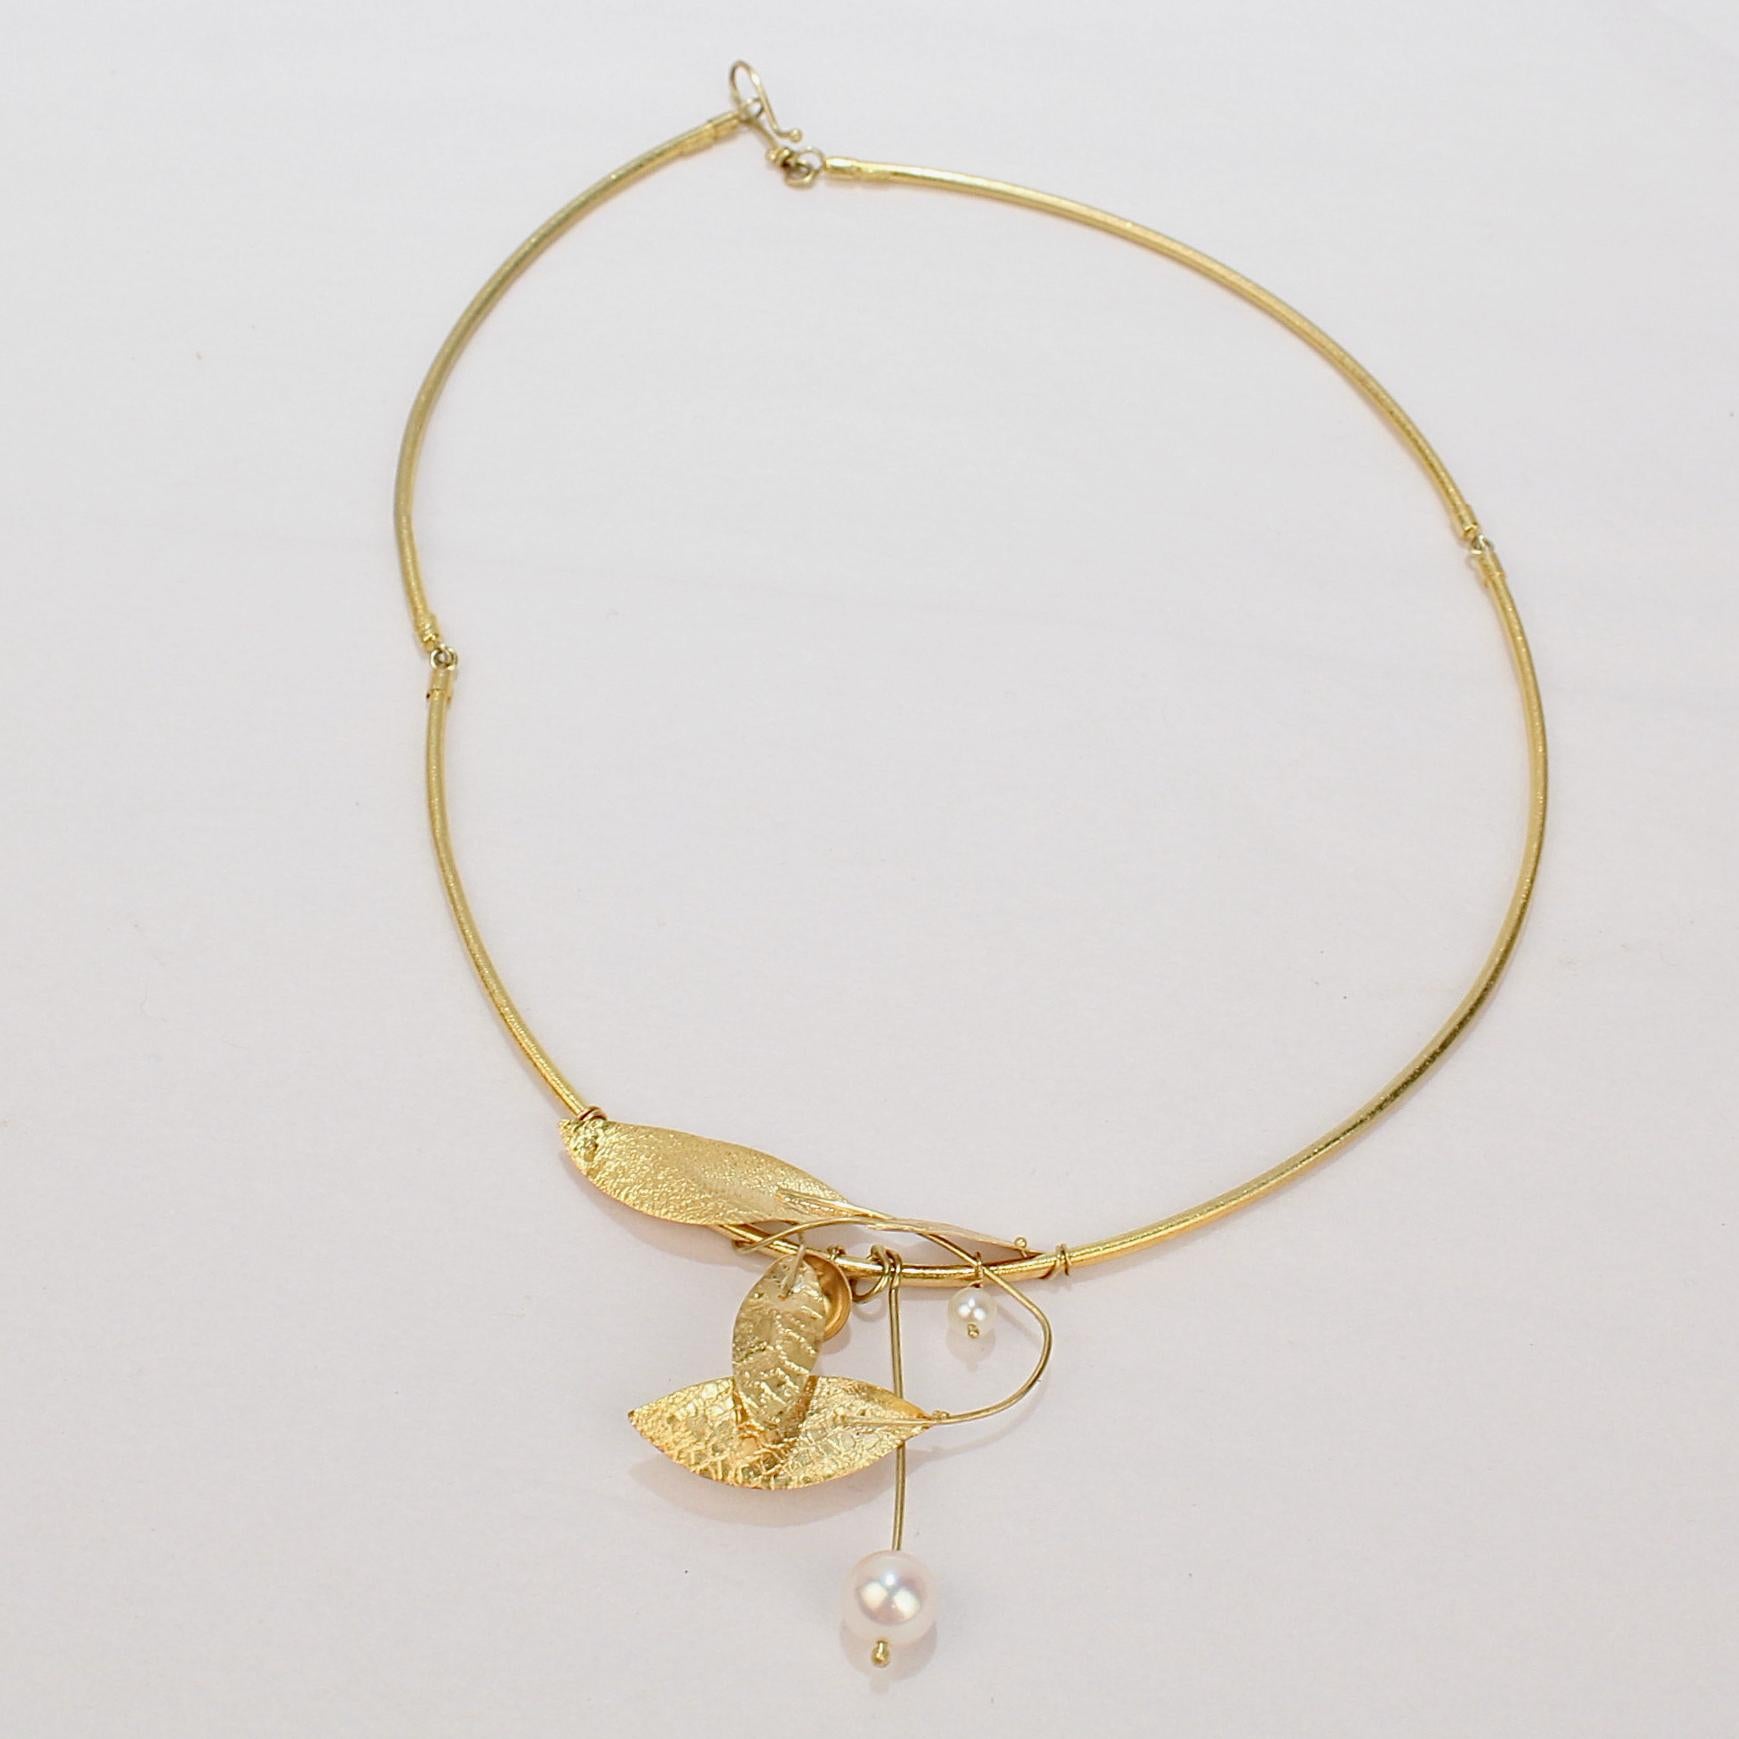 A very fine high karat gold and pearl necklace by Elaf.

This necklace is made of textured leaf shapes overlapping and twisting with pearls suspended on gold wires.  

It is reminiscent of the ancient jewelry of the Mediterranean and evokes notions